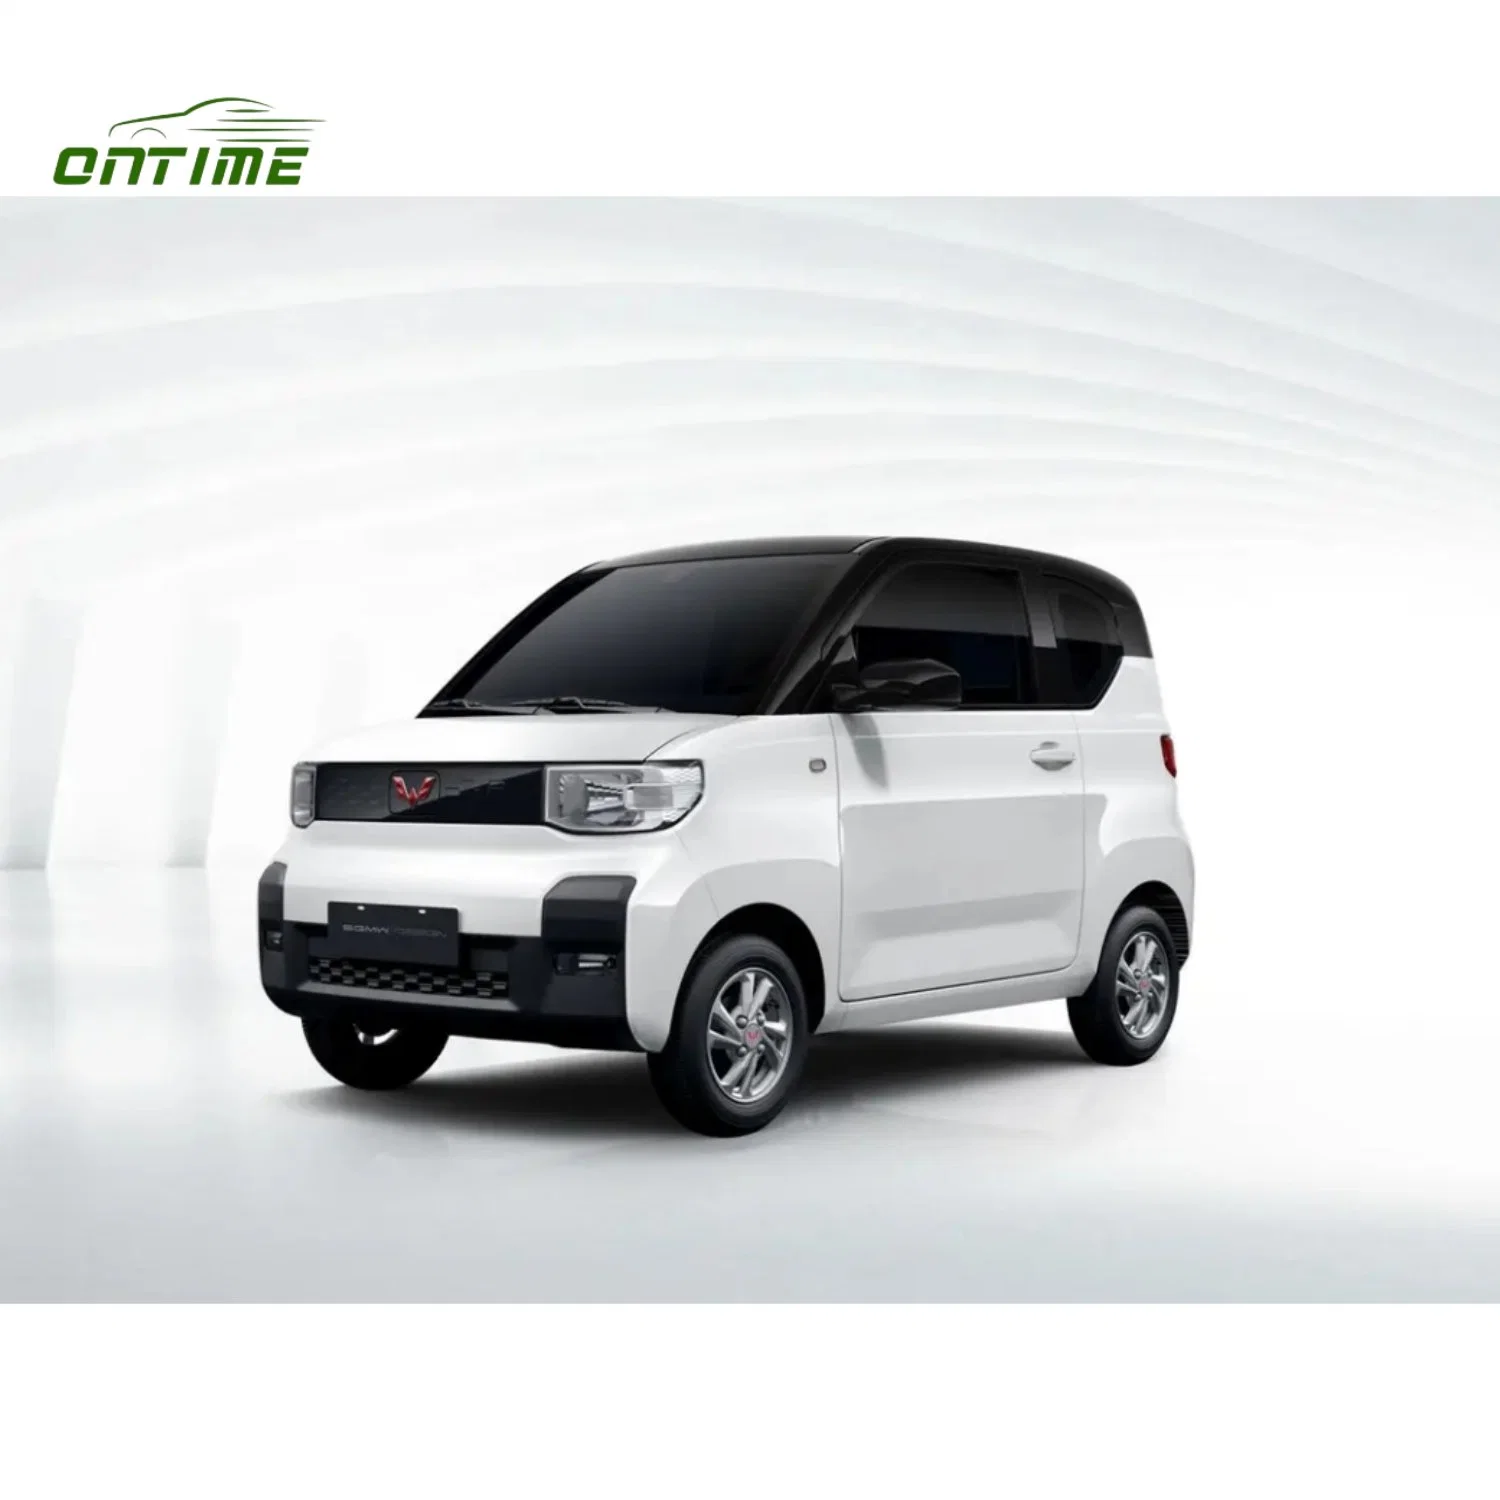 Ontime Miniev China Mini Electric Vehicle Low Priced Pure Electric Small Car